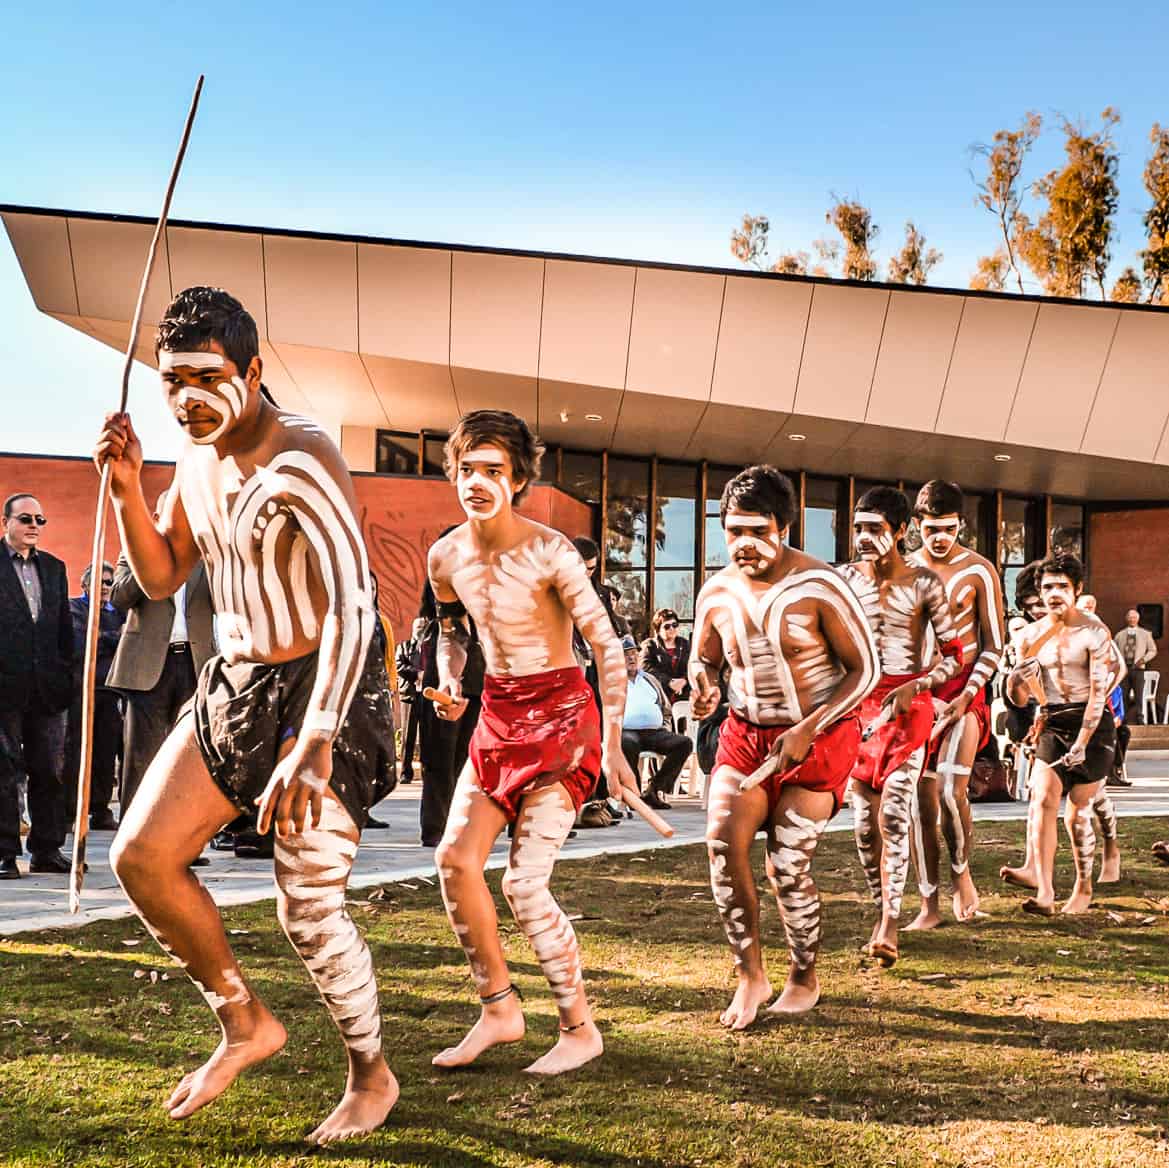 New Rumbalara Helth building official opening

Shepparton News on 23/05/2012   CAPTION:   The MRP dancers from Mooroopna Secondary College perform at yesterday's opening of the new Rumbalara Aboriginal Co-operative health services building.